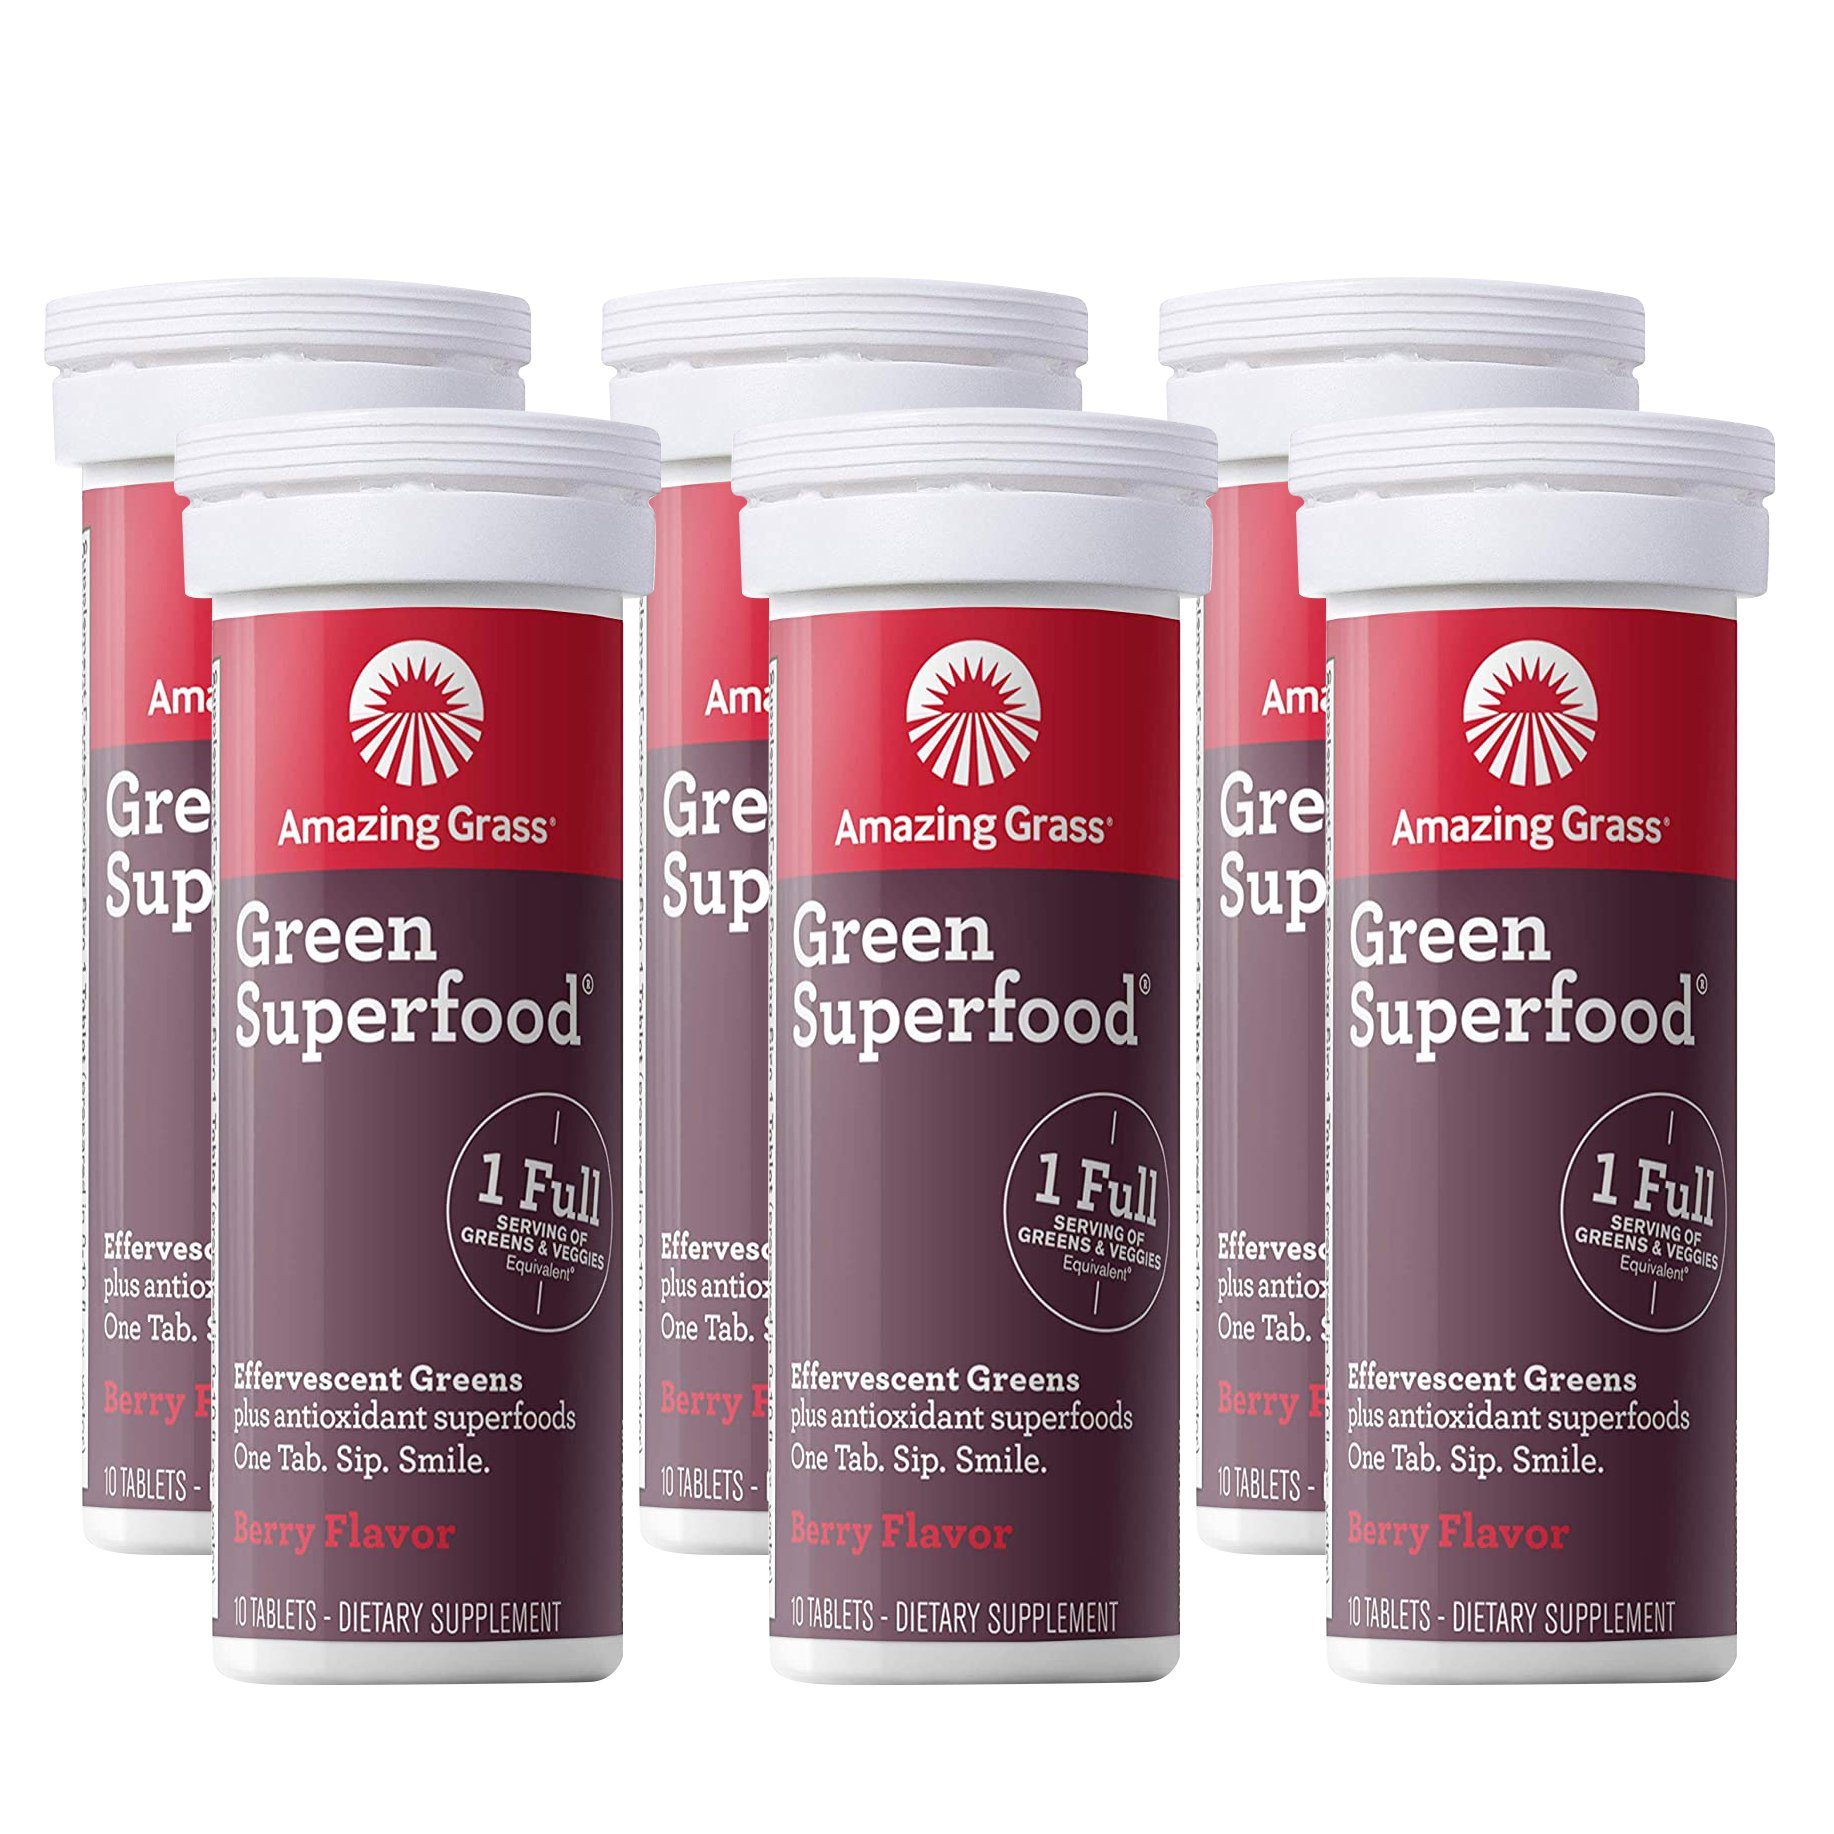 Amazing Grass Green Superfood Water Flavoring Tablet with Antioxidants and Alkalizing Greens / Berry